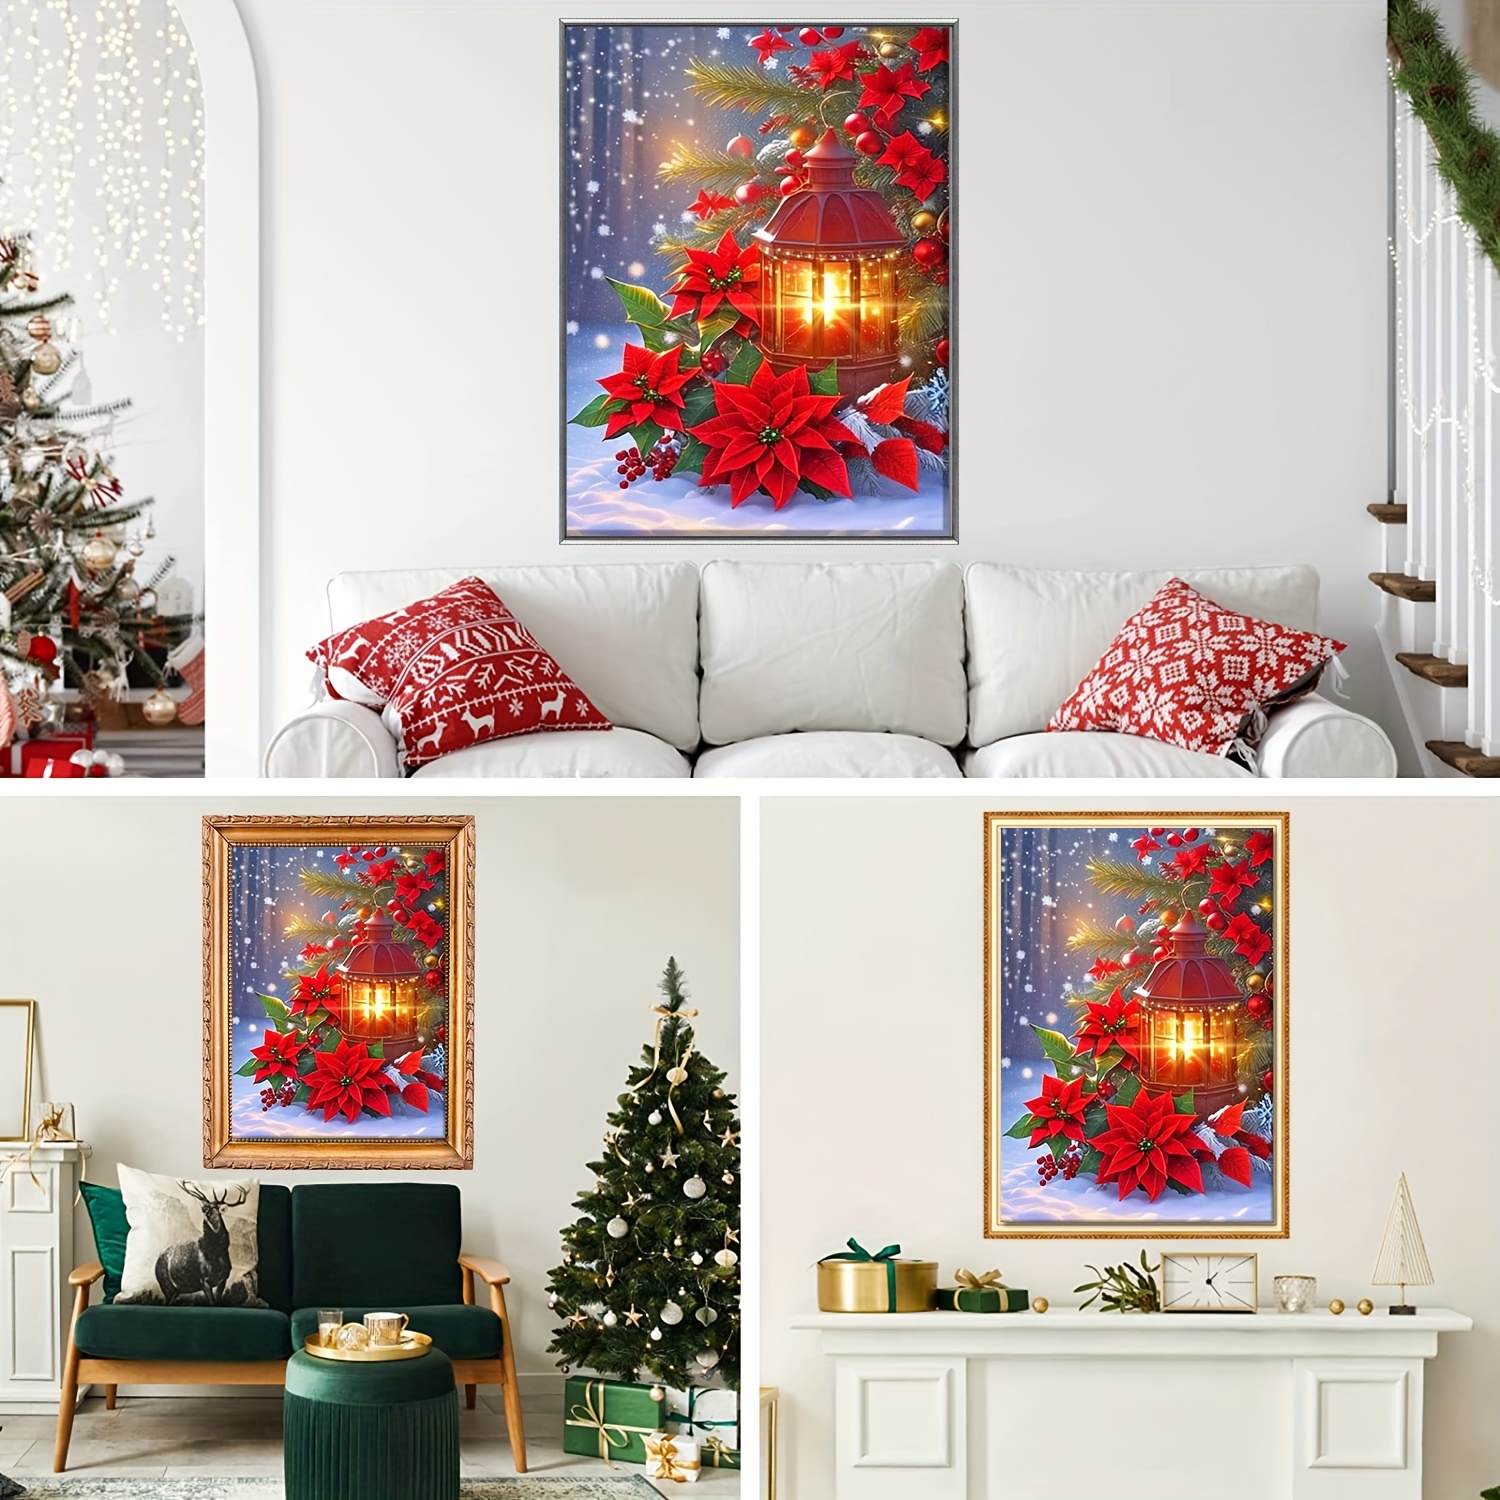  IPISSOI Christmas Flower 5D Diamond Painting Kits DIY for  Adults Kids Vintage Beautiful Poinsettia Holly Leaves and Berries DIY  Diamond Paint by Numbers Kit for Home Wall Decor 12X16 Inch